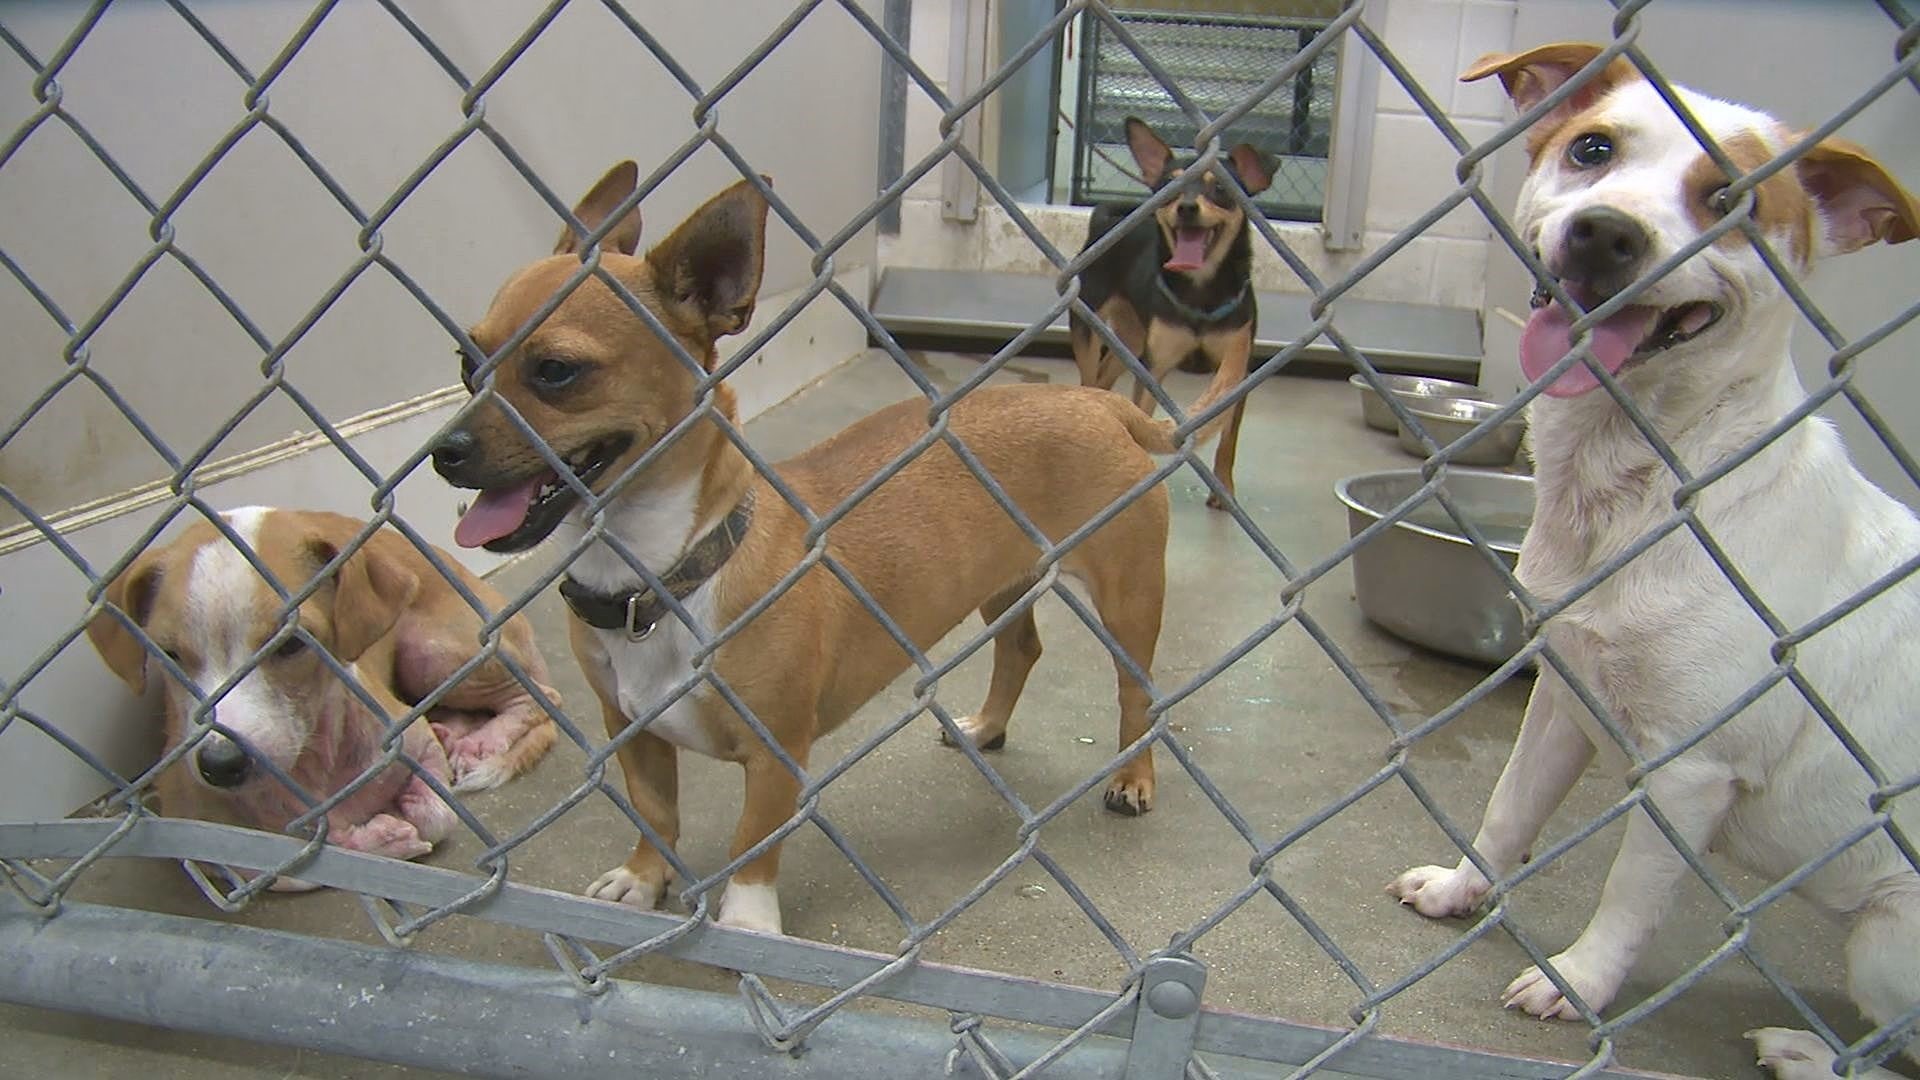 The City of Temple is planning a $2 million expansion at the animal shelter.